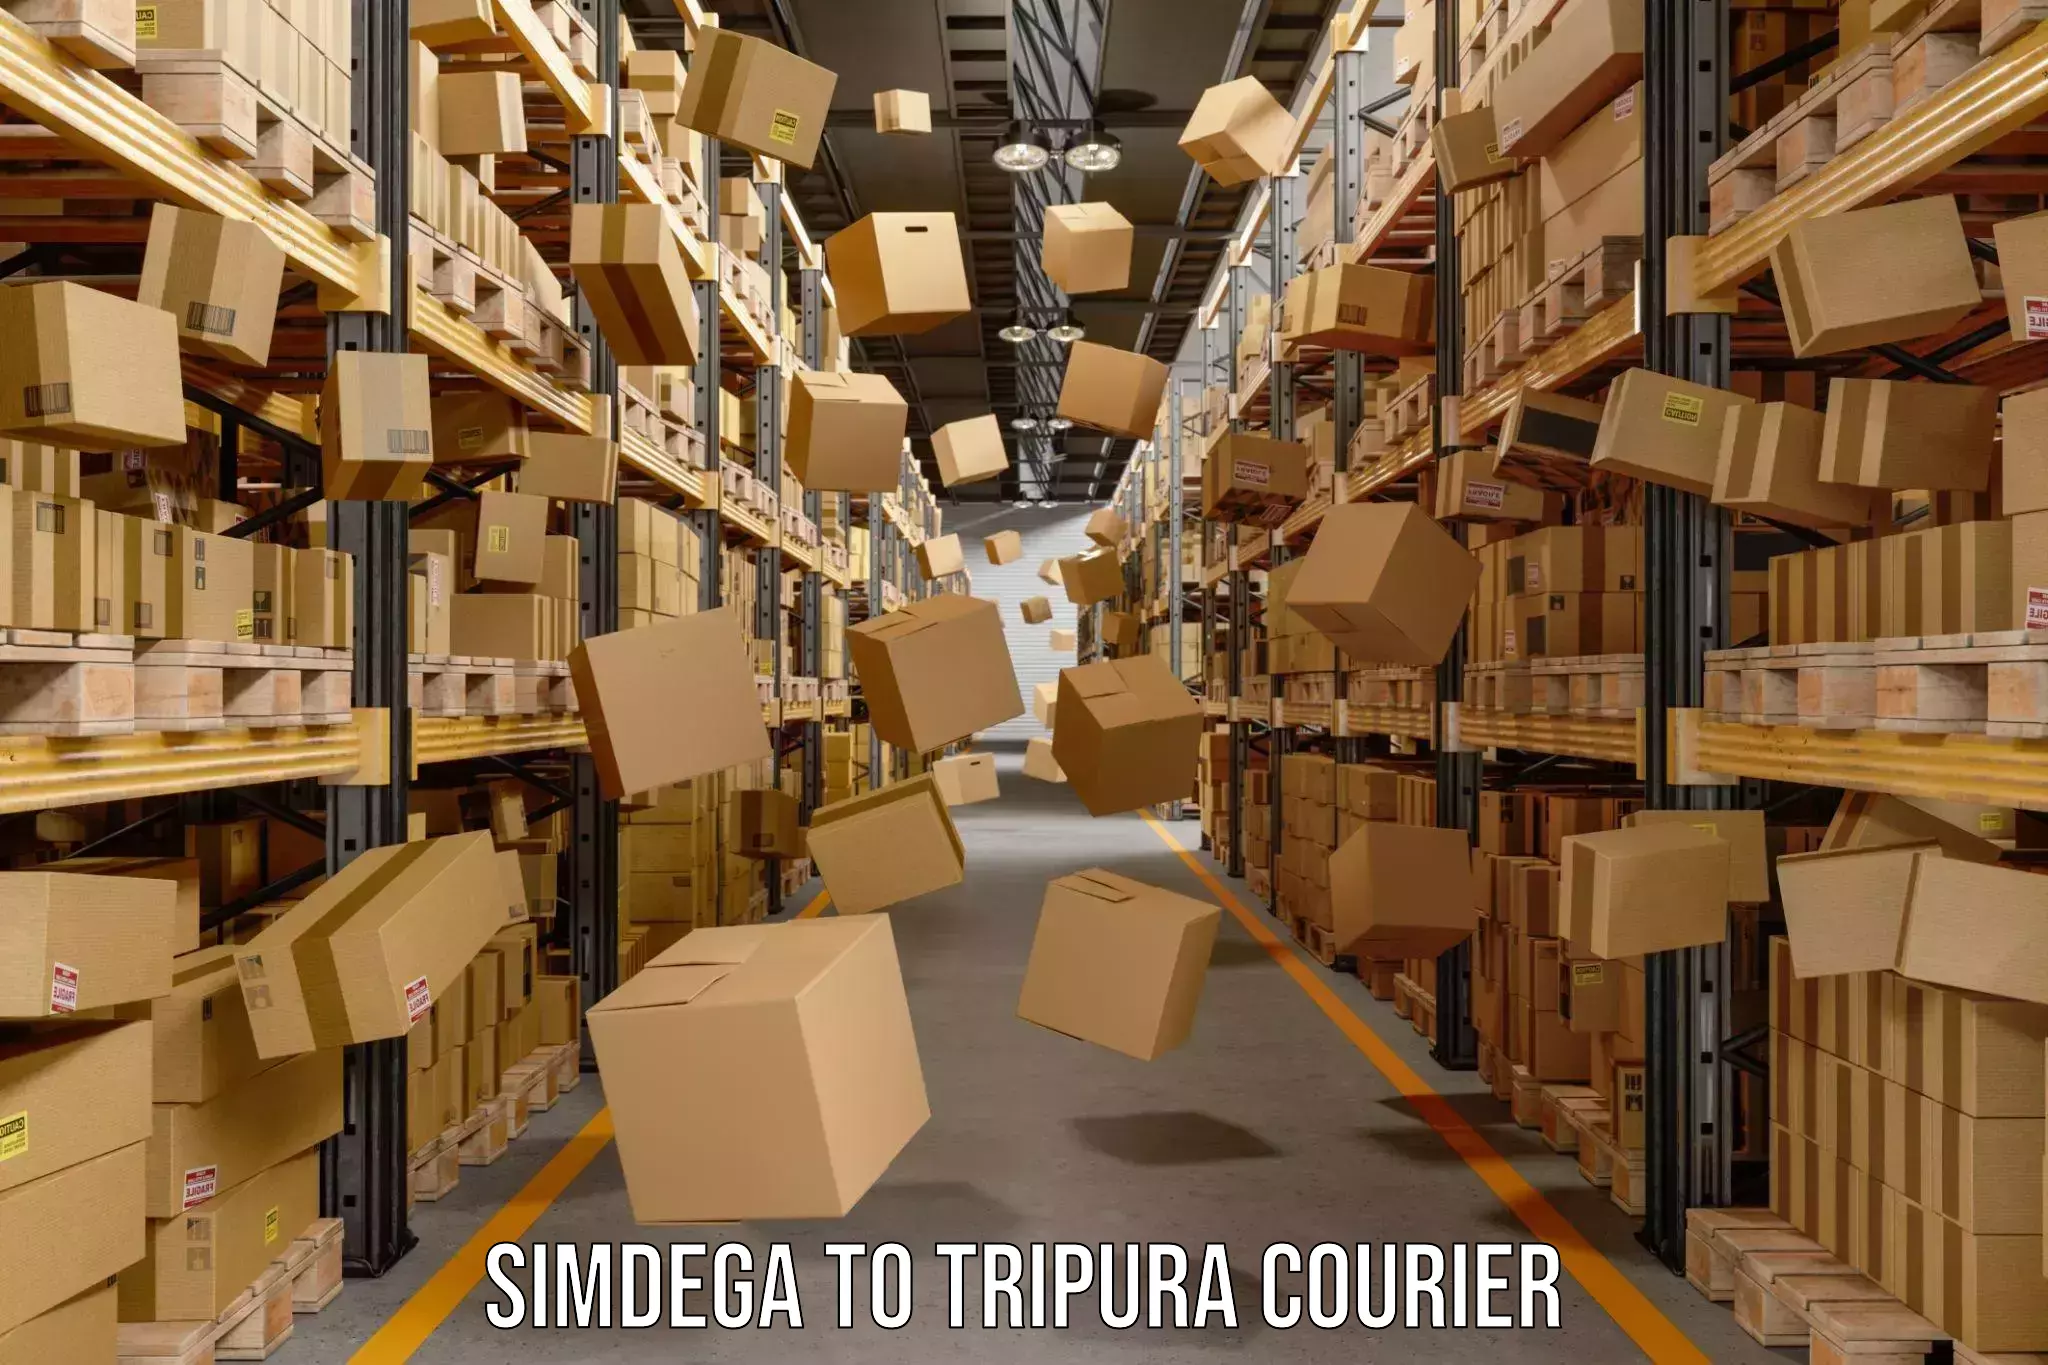 Flexible delivery schedules Simdega to Udaipur Tripura